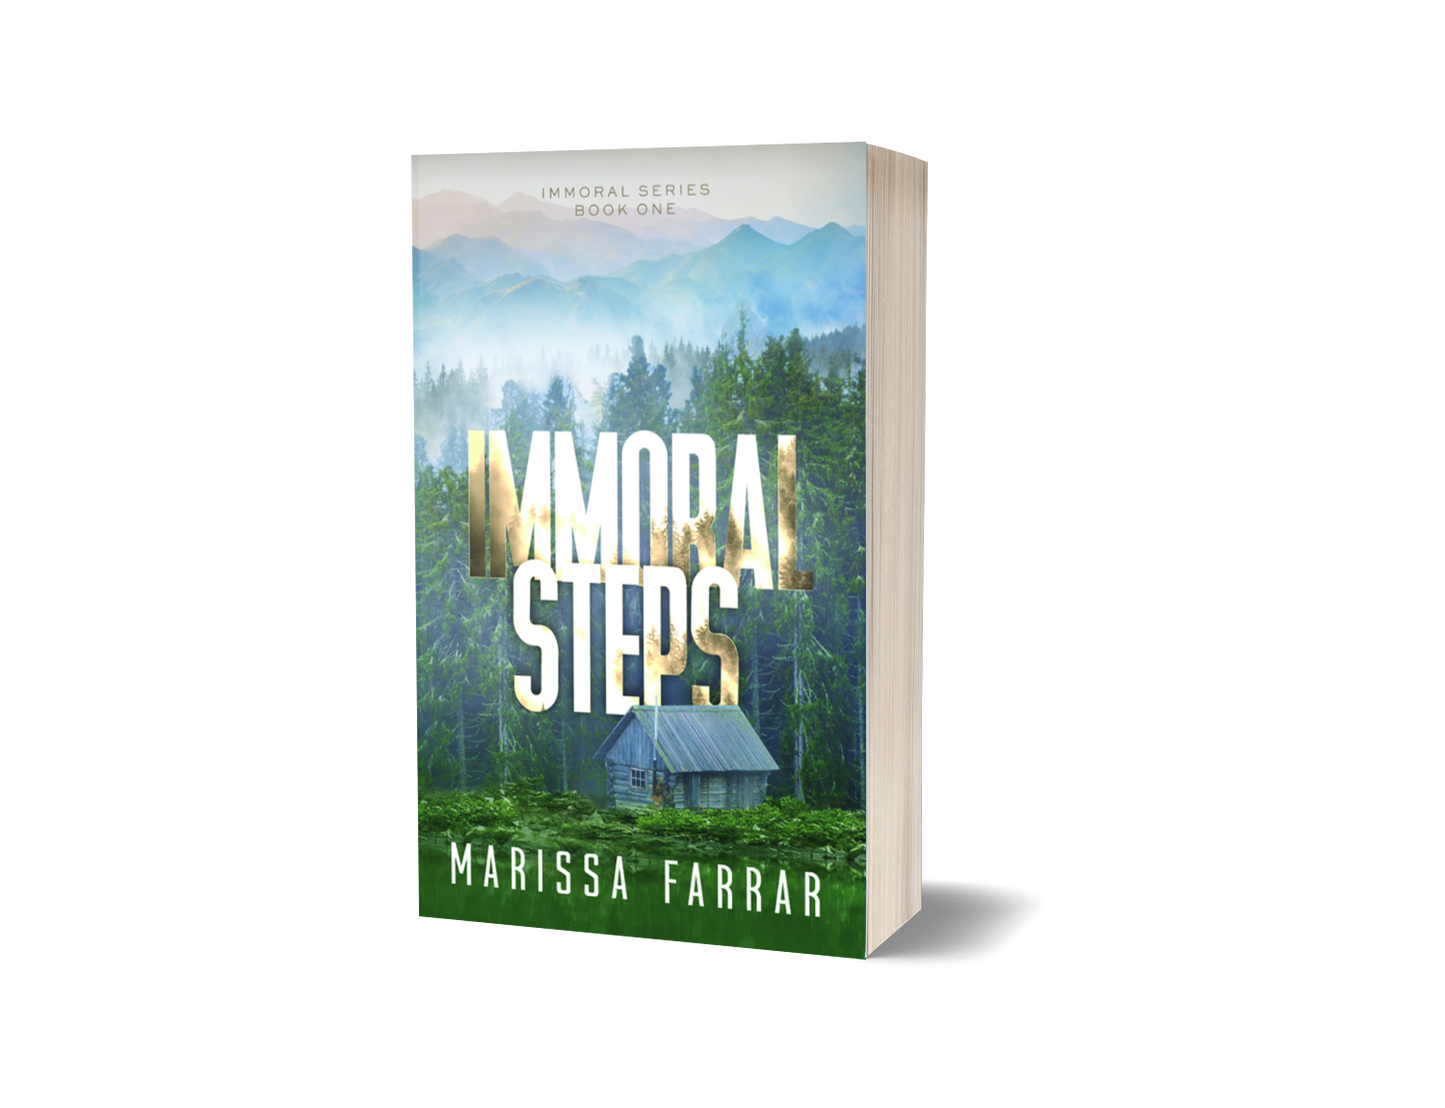 The Why Choose Forbidden romance Immoral Series by Marissa Farrar Paperback, Signed, Print Book, Soft Cover Discreet